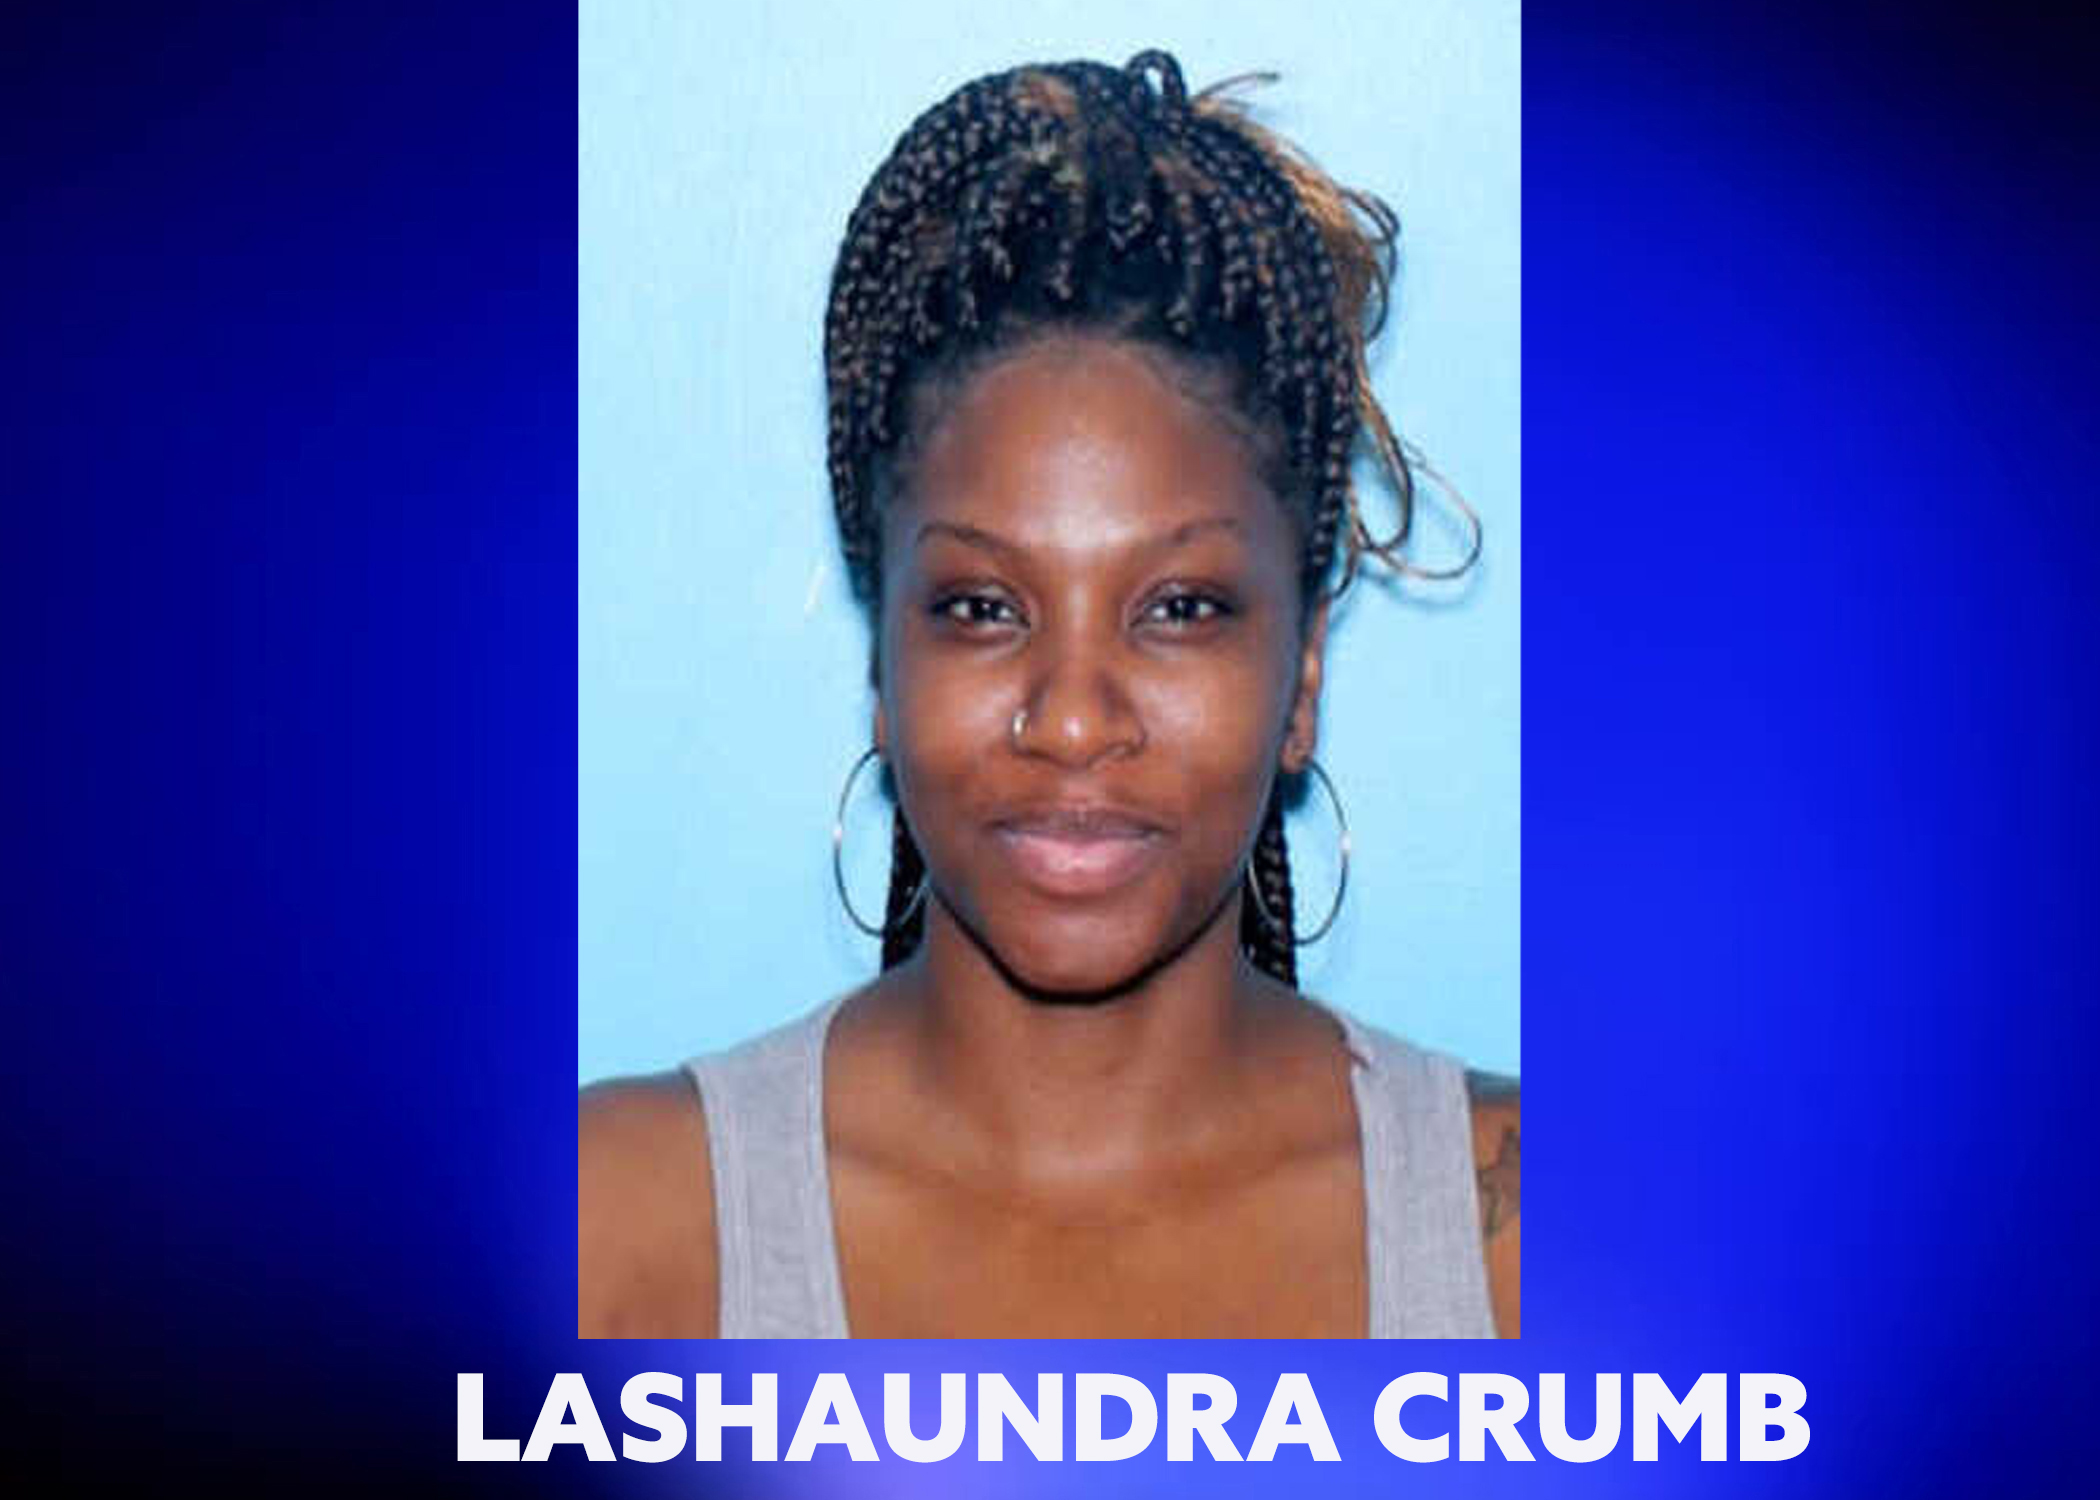 UPDATE: Missing pregnant woman found safe